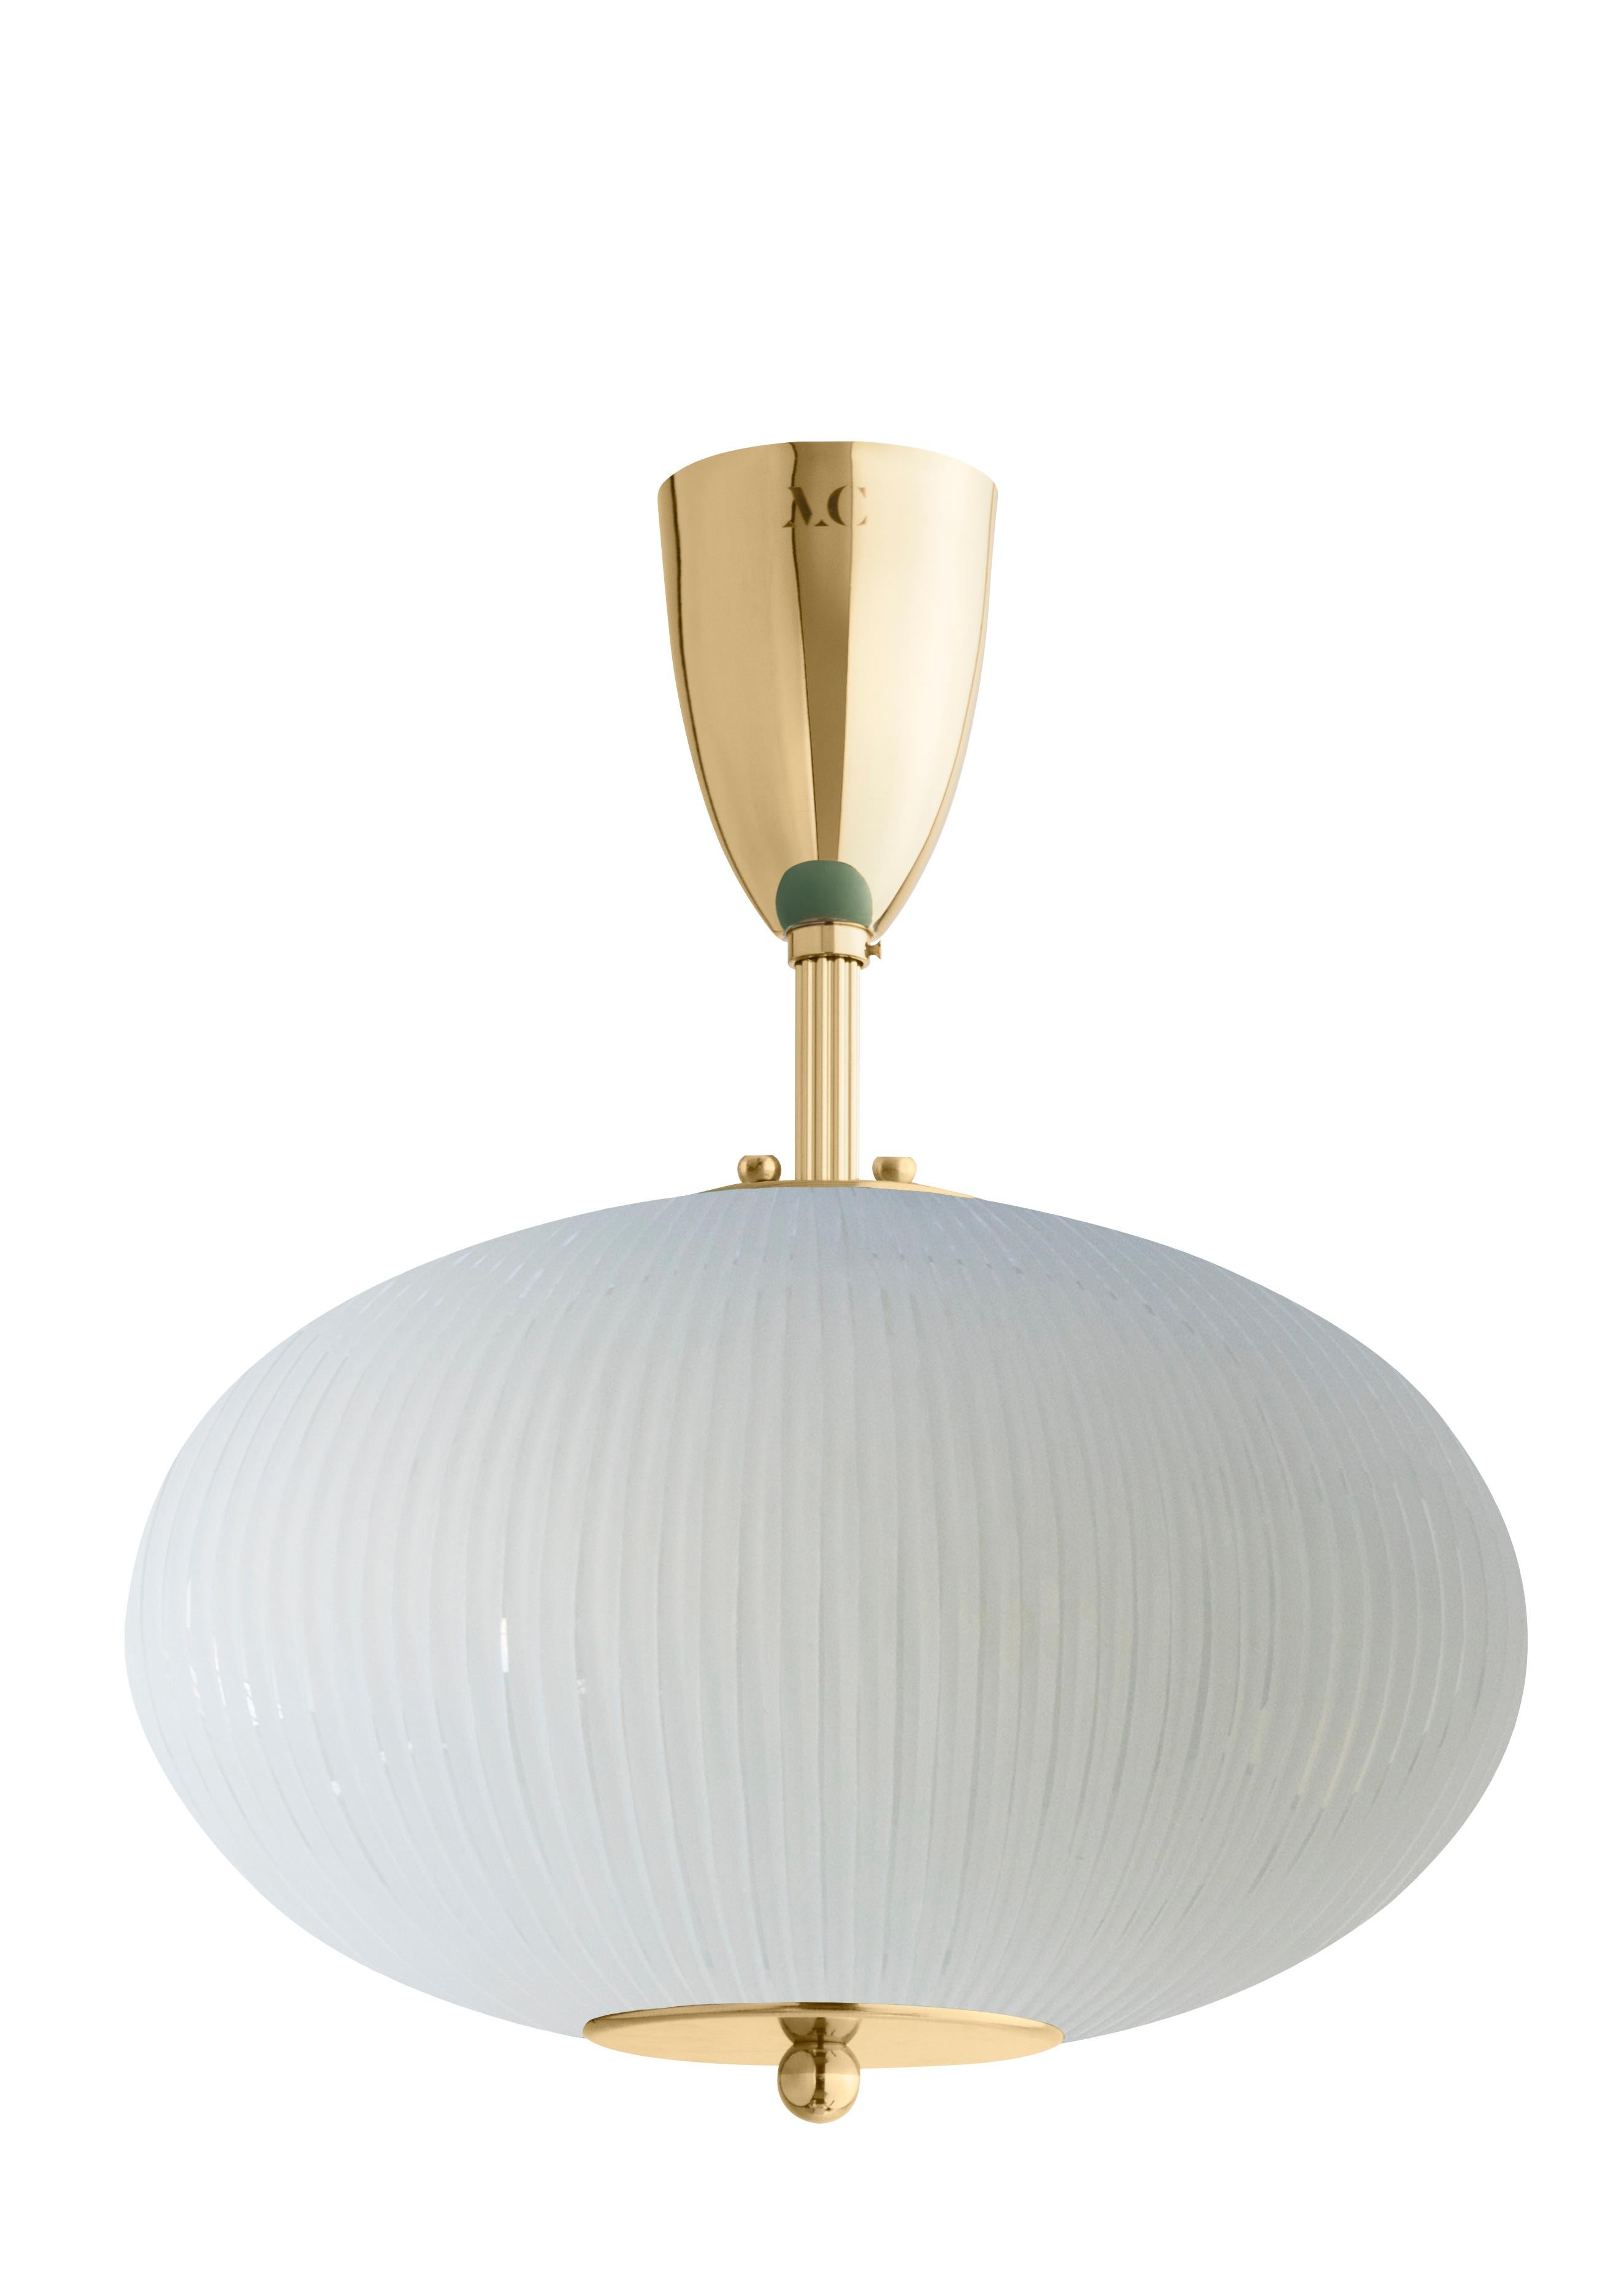 Ceiling lamp China 07 by Magic Circus Editions
Dimensions: H 40 x W 32 x D 32 cm
Materials: Brass, mouth blown glass sculpted with a diamond saw
Colour: rich grey

Available finishes: Brass, nickel
Available colours: enamel soft white, soft